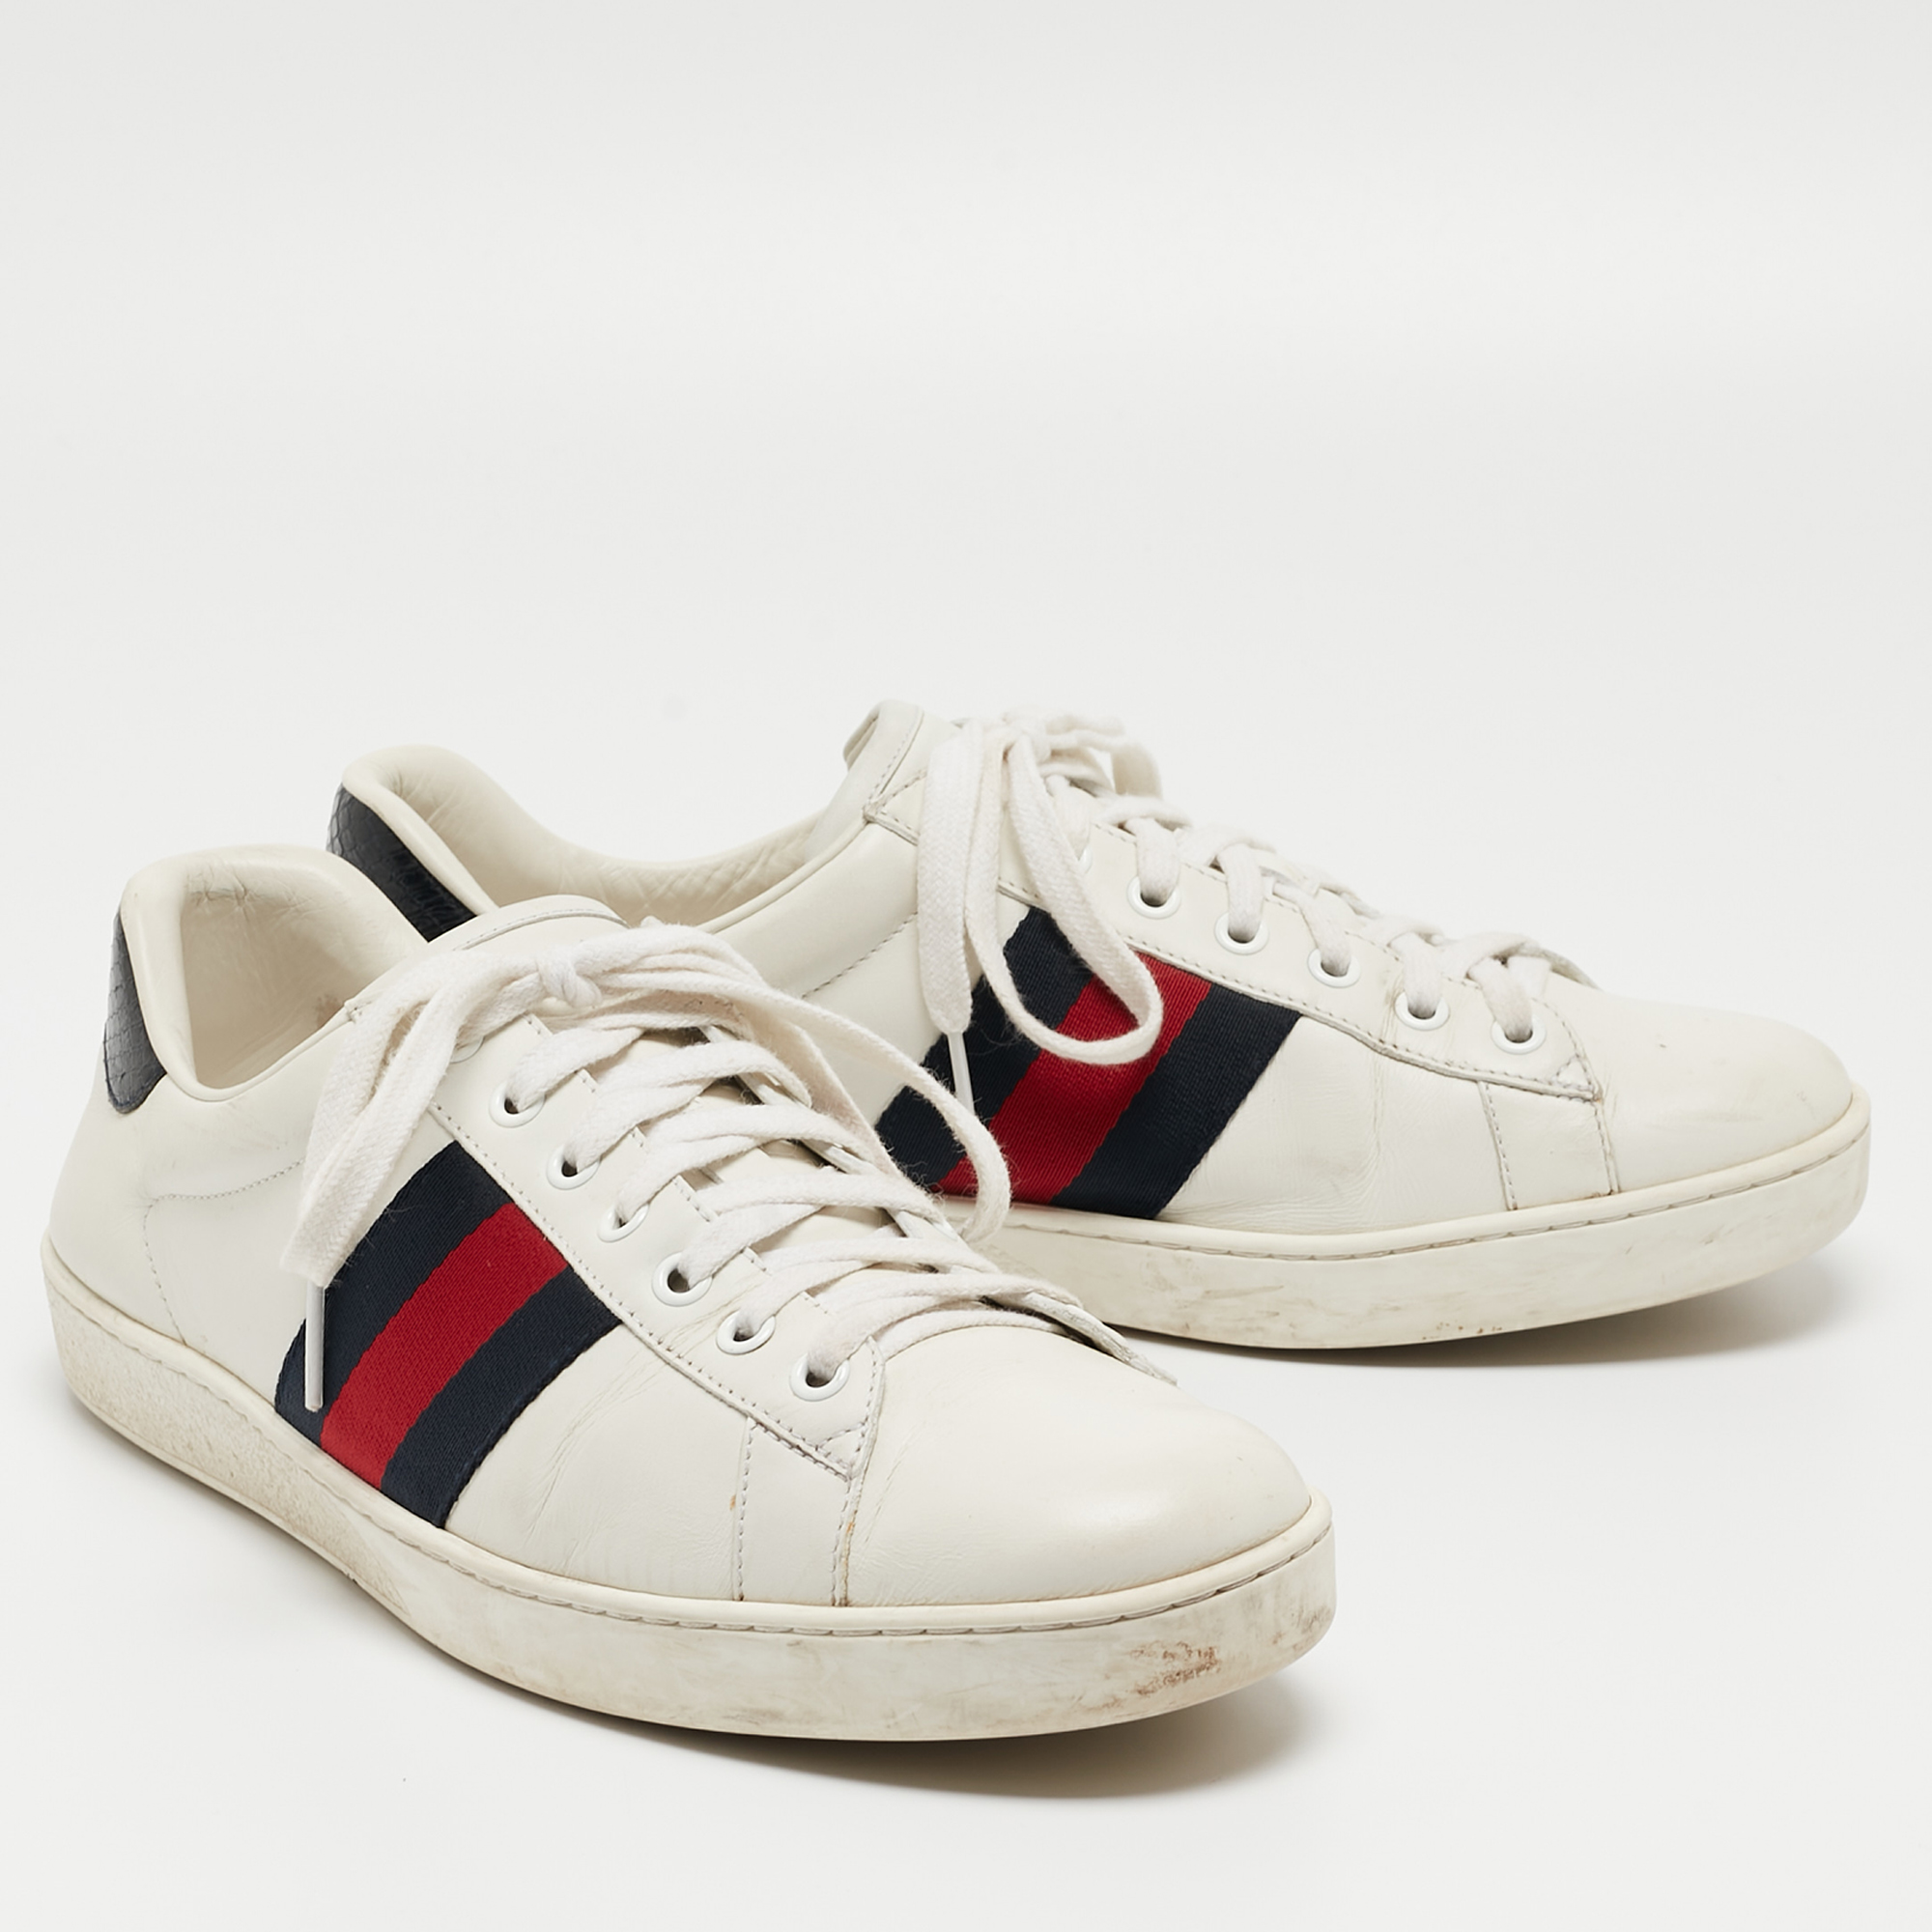 Gucci White Leather Ace Low Top Sneakers Size 42